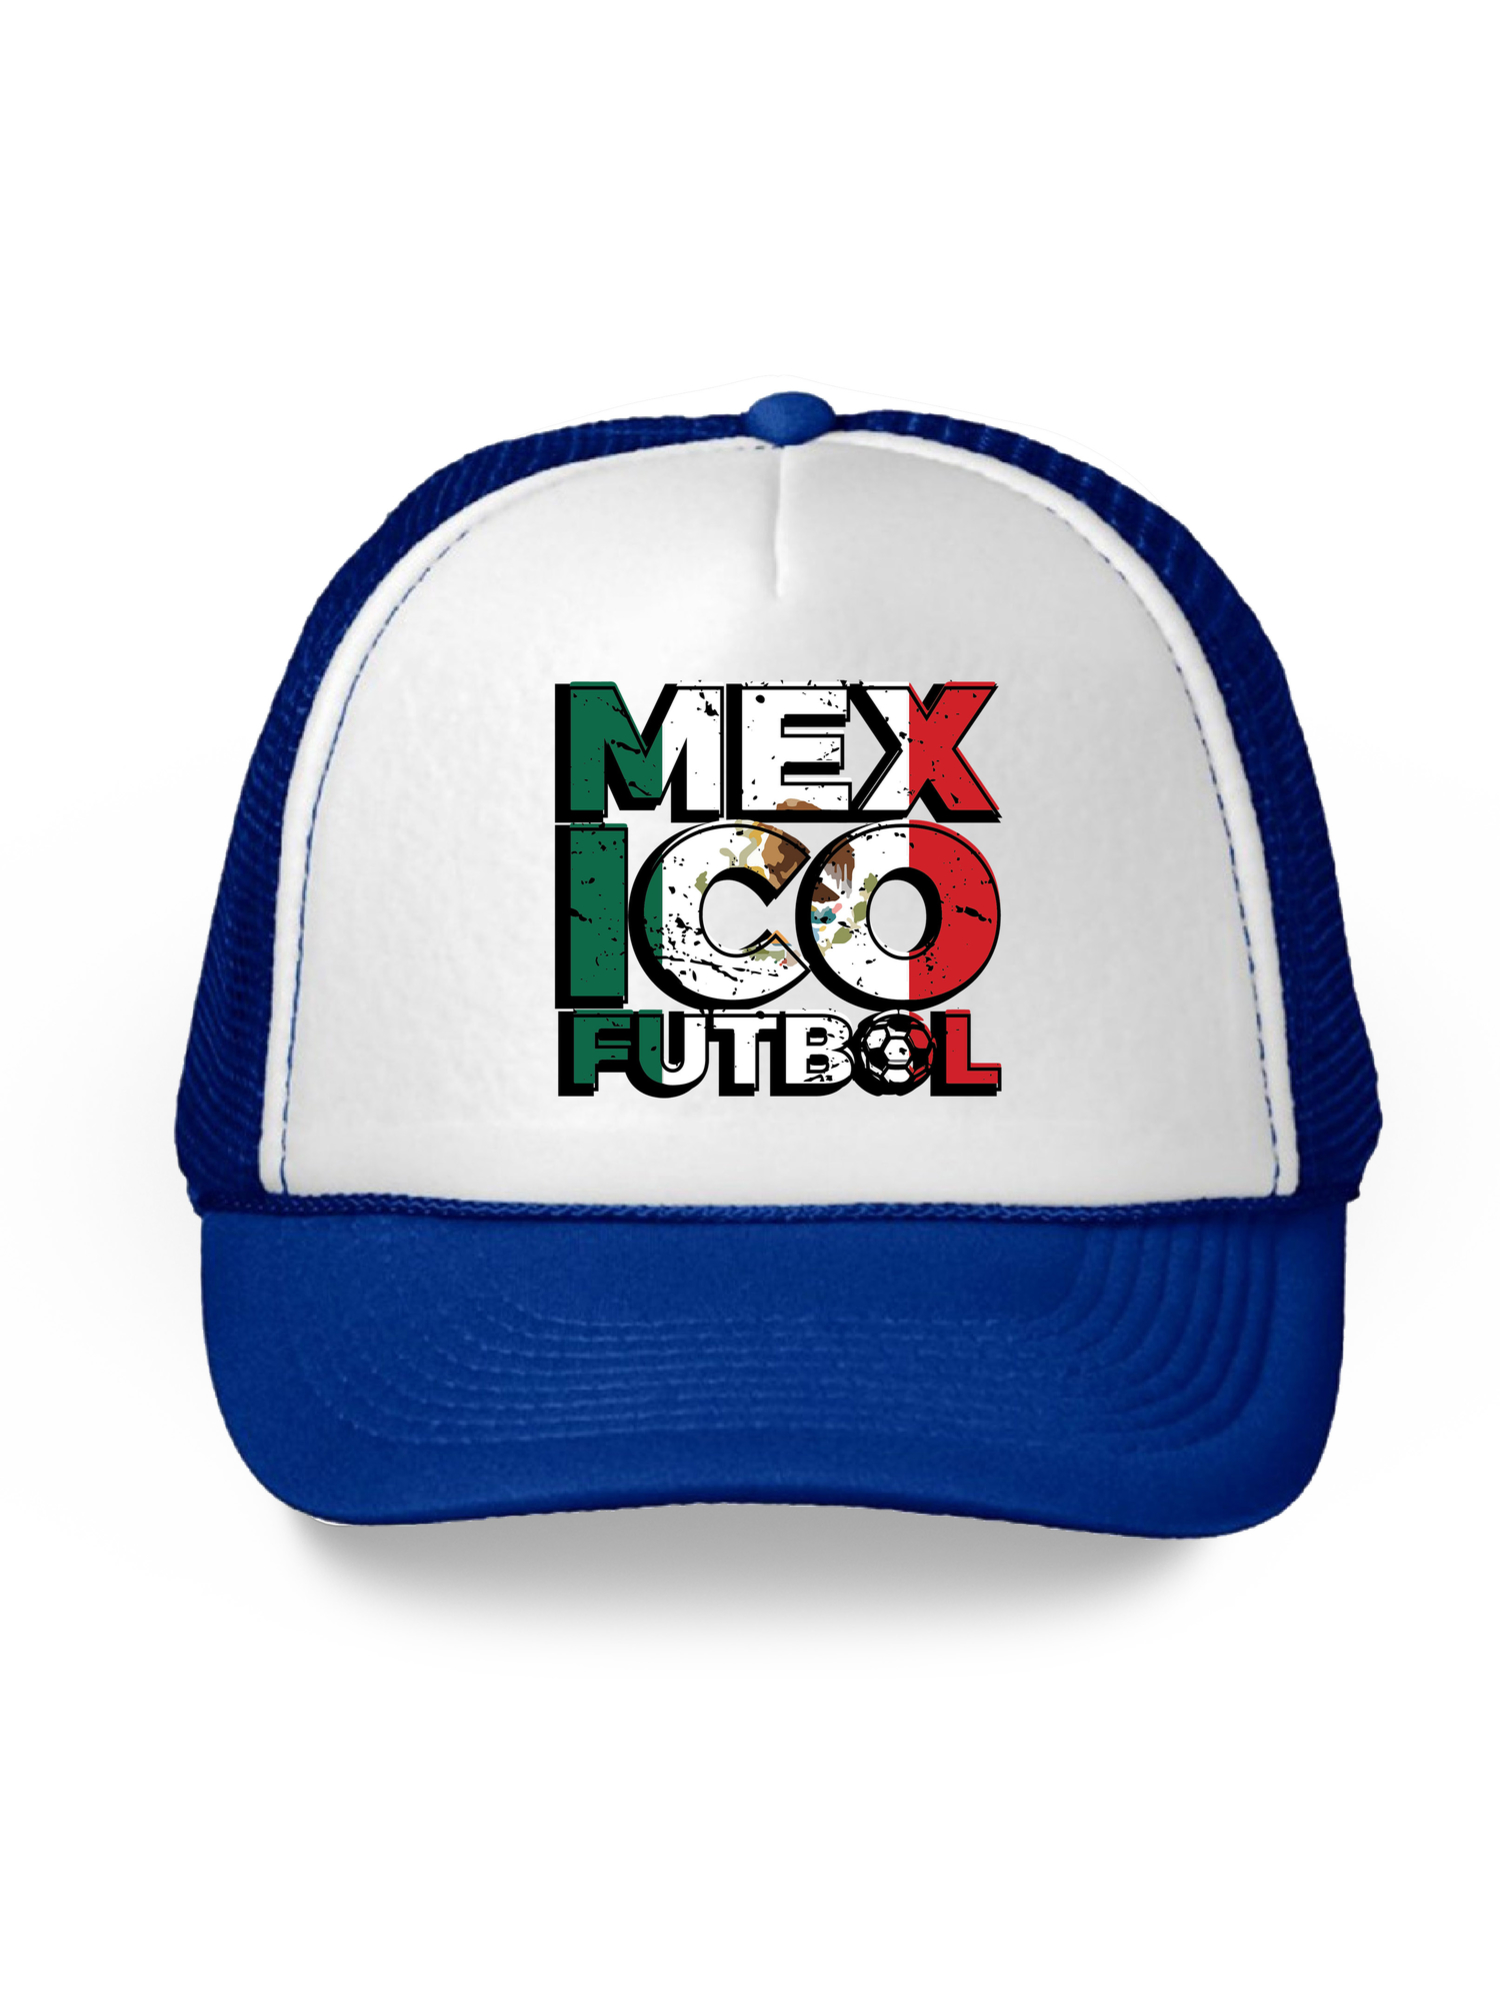 Awkward Styles Mexico Futbol Hat Mexico Trucker Hats for Men and Women Hat Gifts from Mexico Mexican Soccer Cap Mexican Hats Unisex Mexico Snapback Hat Mexico 2018 Trucker Hats Mexico Football Hat - image 1 of 6